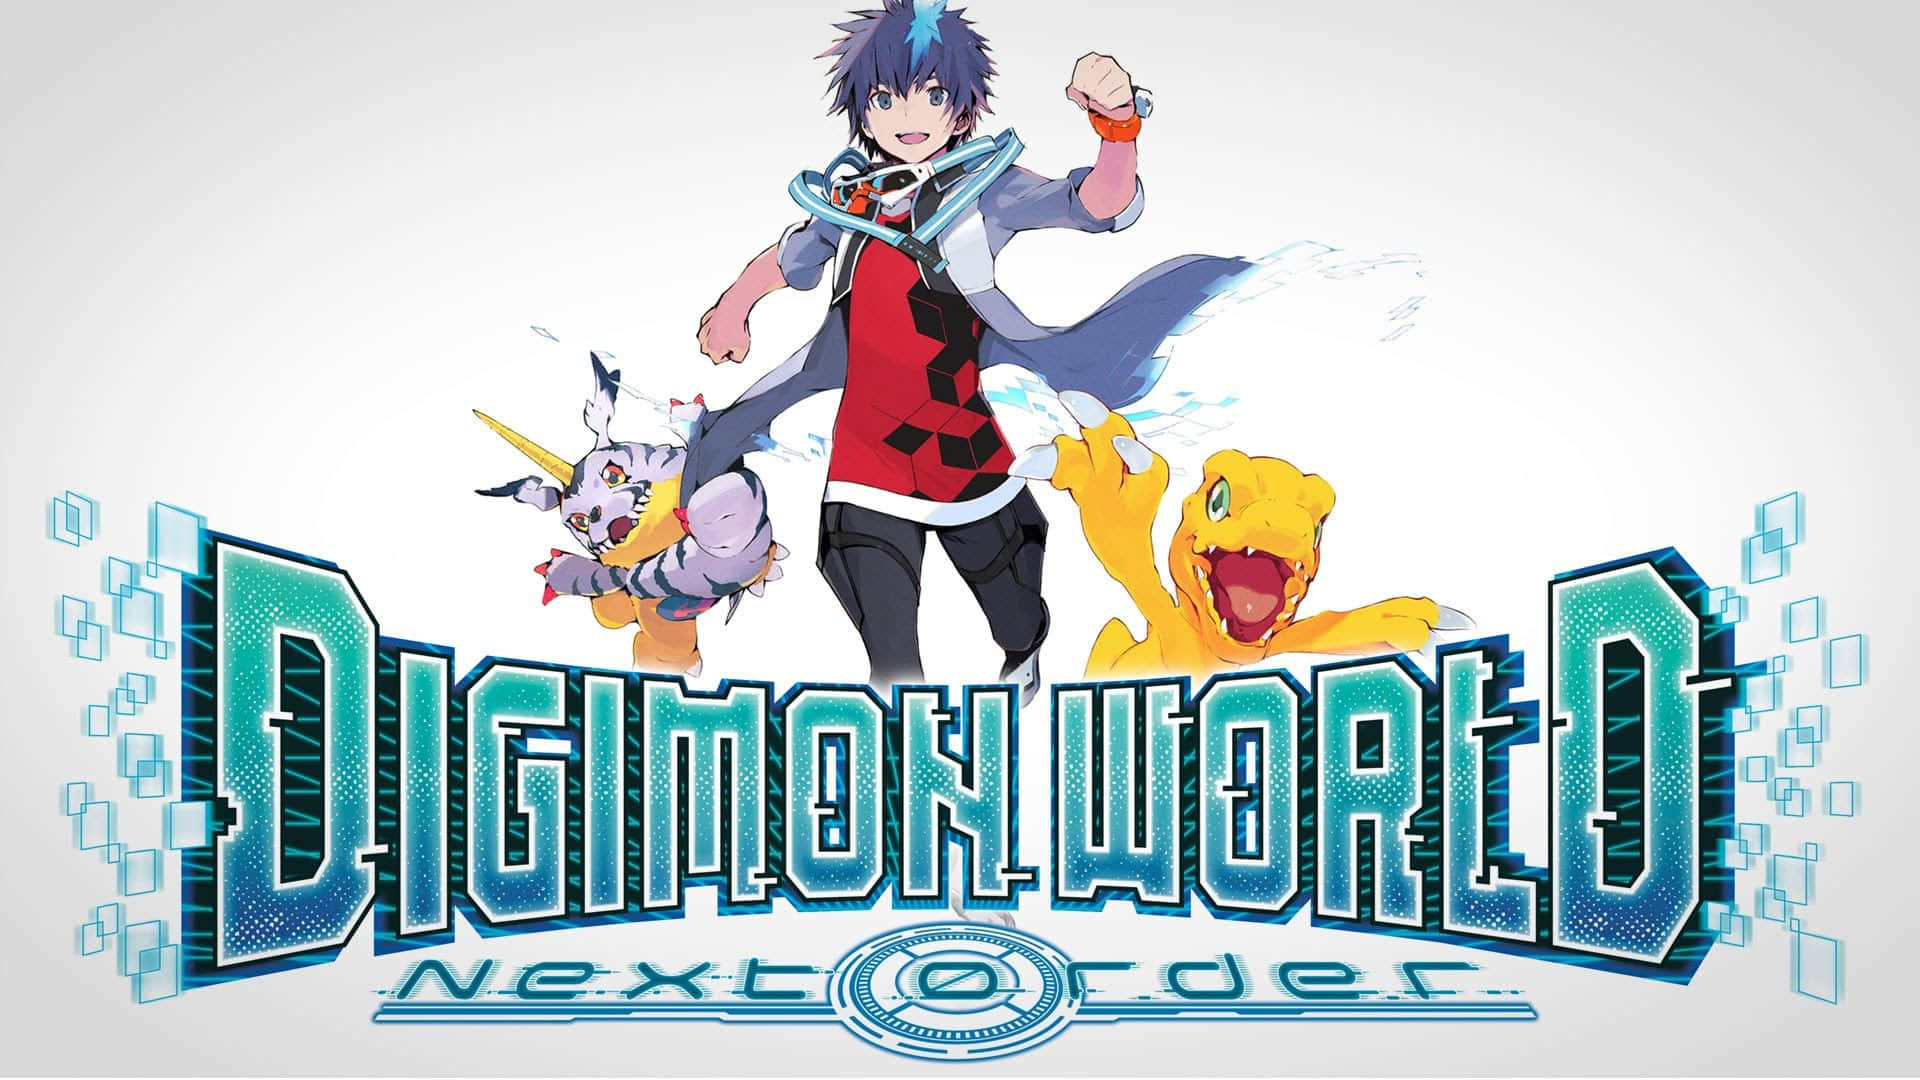 Explore the Digital World with your Digimon Partner